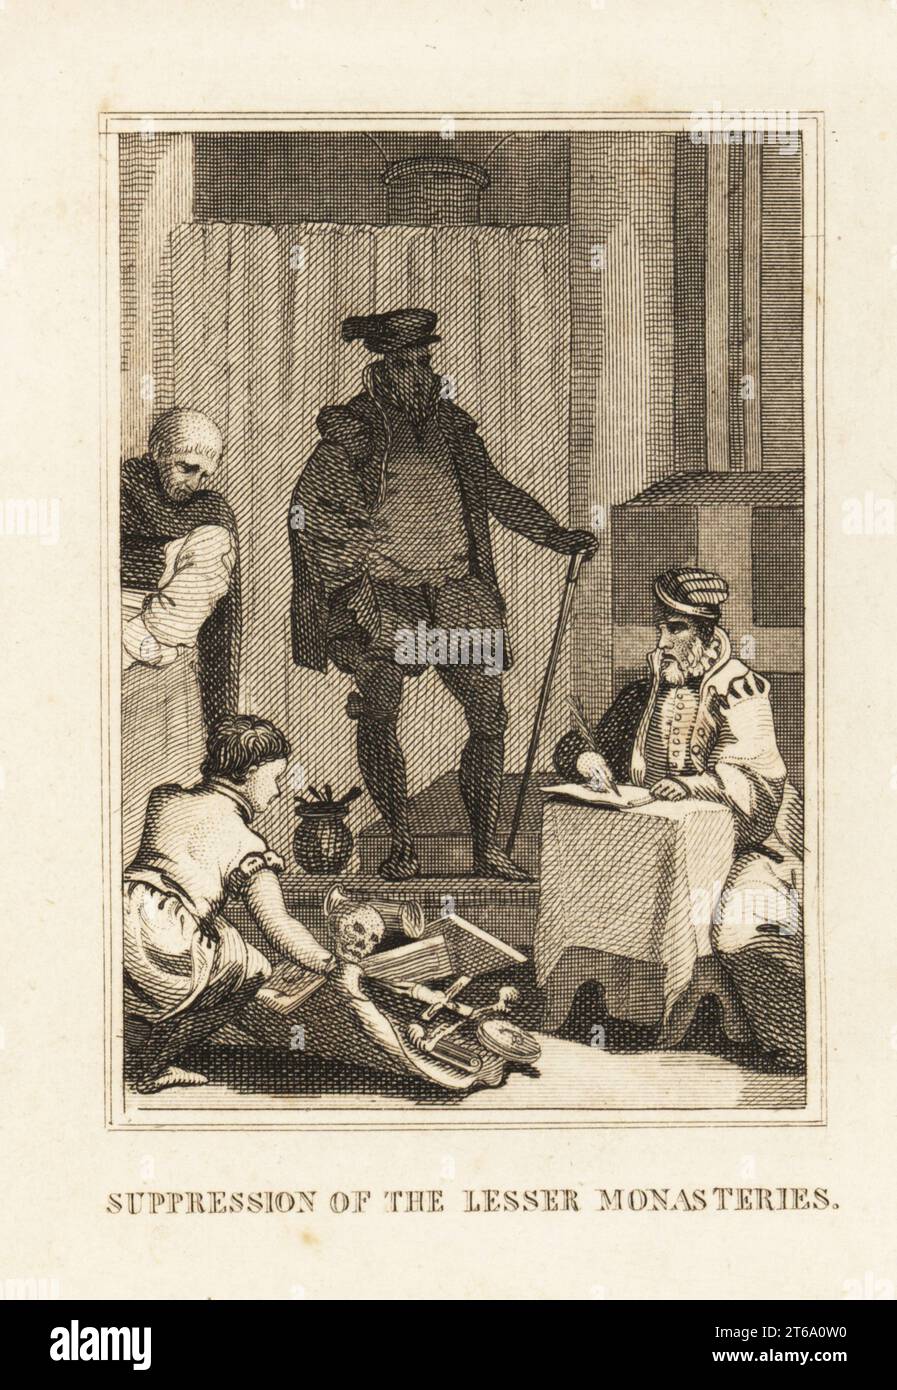 King Henry VIII overseeing the dissolution of the Catholic monasteries, 1536-41. A boy steals relics, gold, crucifix, and other booty in front of a clerk and a monk. Suppression of the lesser monasteries. Copperplate engraving from M. A. Jones History of England from Julius Caesar to George IV, G. Virtue, 26 Ivy Lane, London, 1836. Stock Photo